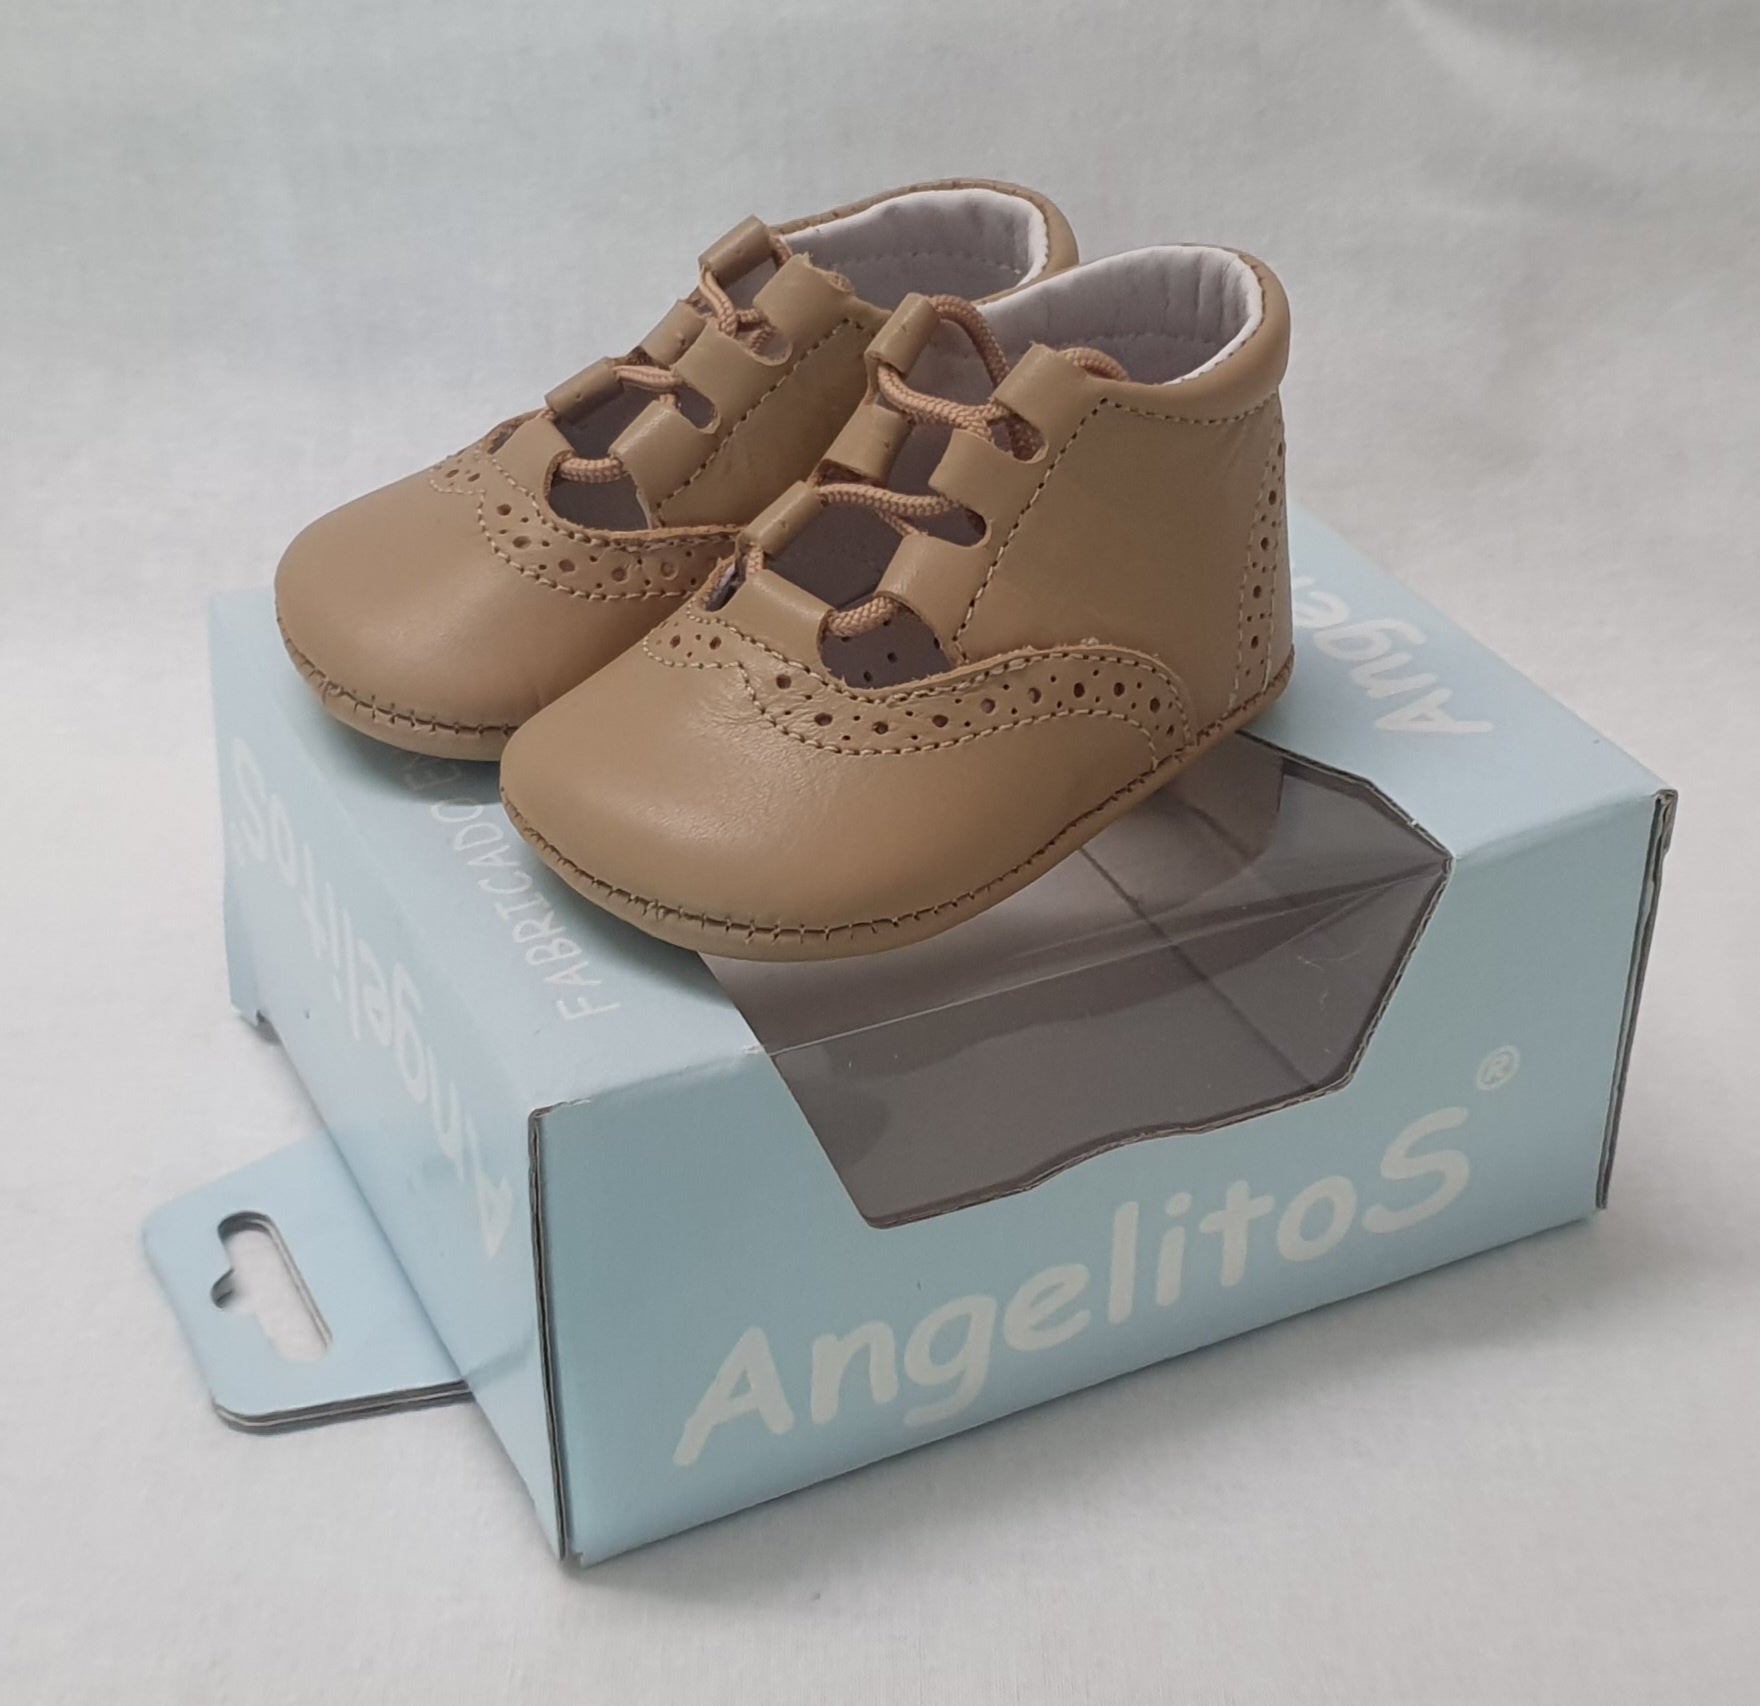 Baby Shoes Angelitos 256 - Camel Size 17